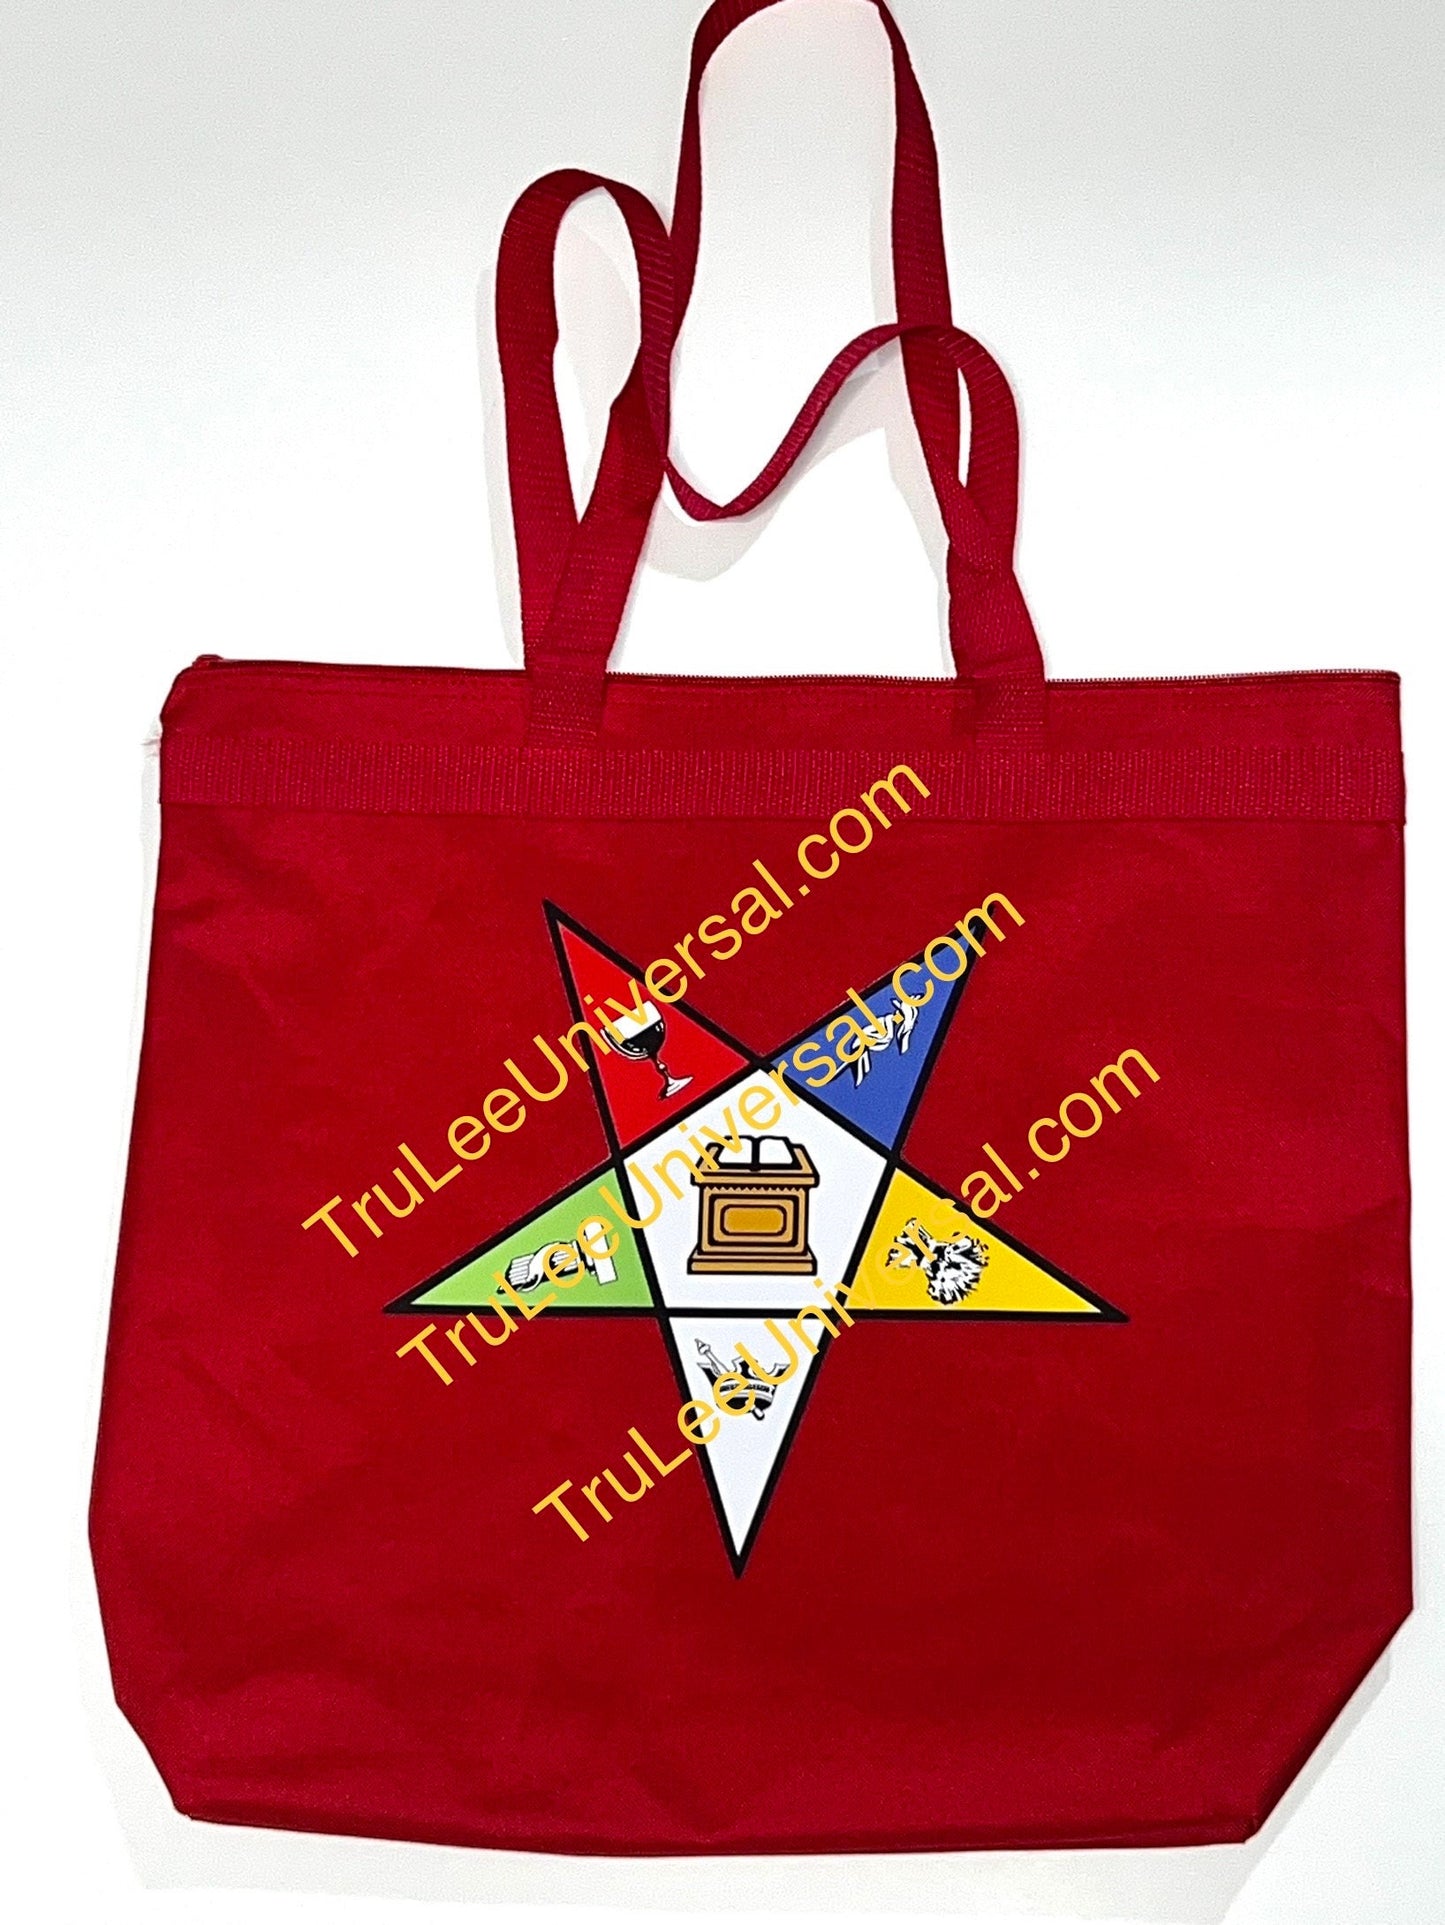 Order of Eastern Star OES logo large Red bag w/ zipper, Logo on one sides